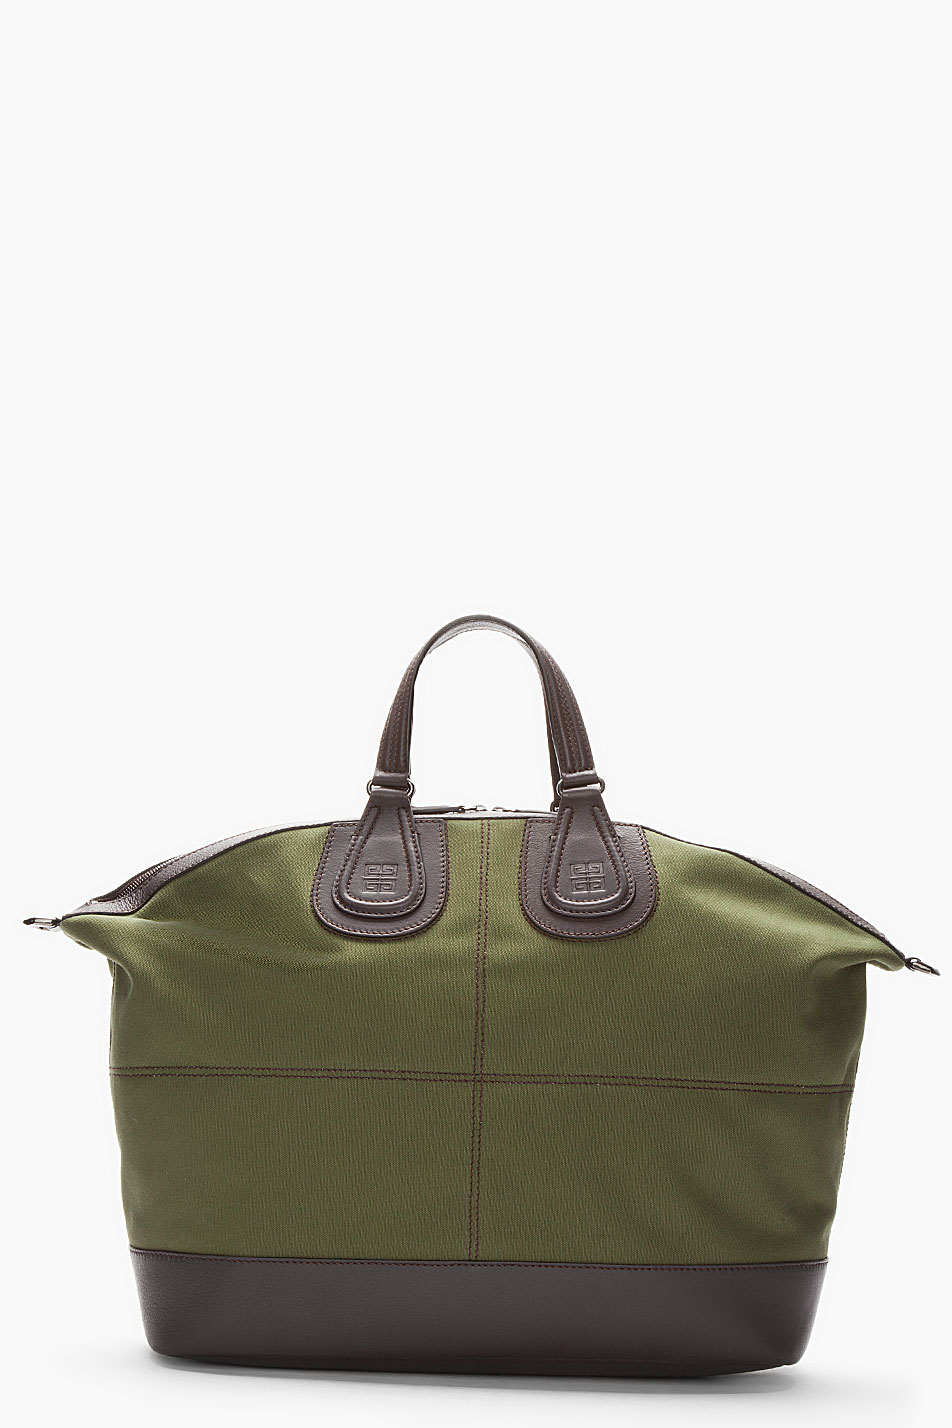 Givenchy Army Green Leather Trimmed Nightingale Duffle Bag